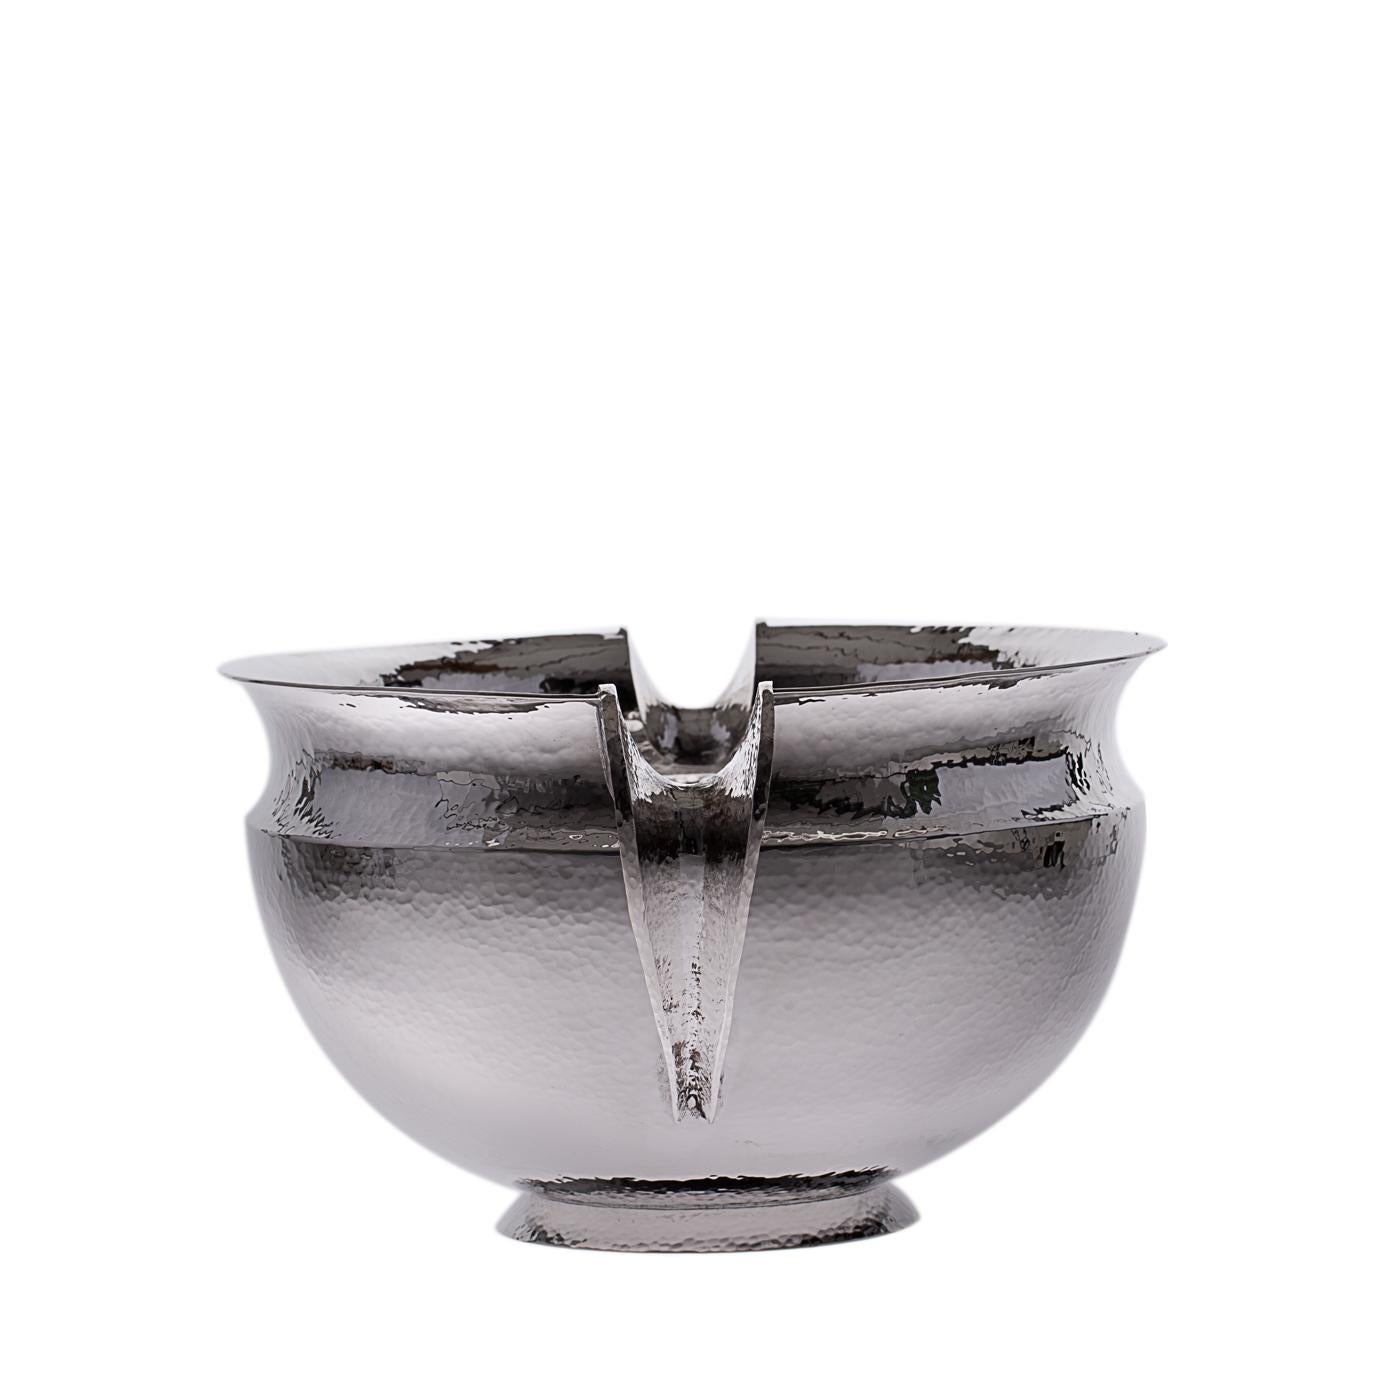 A shimmering sterling silver trophy bowl consummately handcrafted by the Florentine silversmith Pampaloni. The artisan was inspired by Trojan silverware for this Classic centerpiece that, like the other pieces of the Troiana collection, is